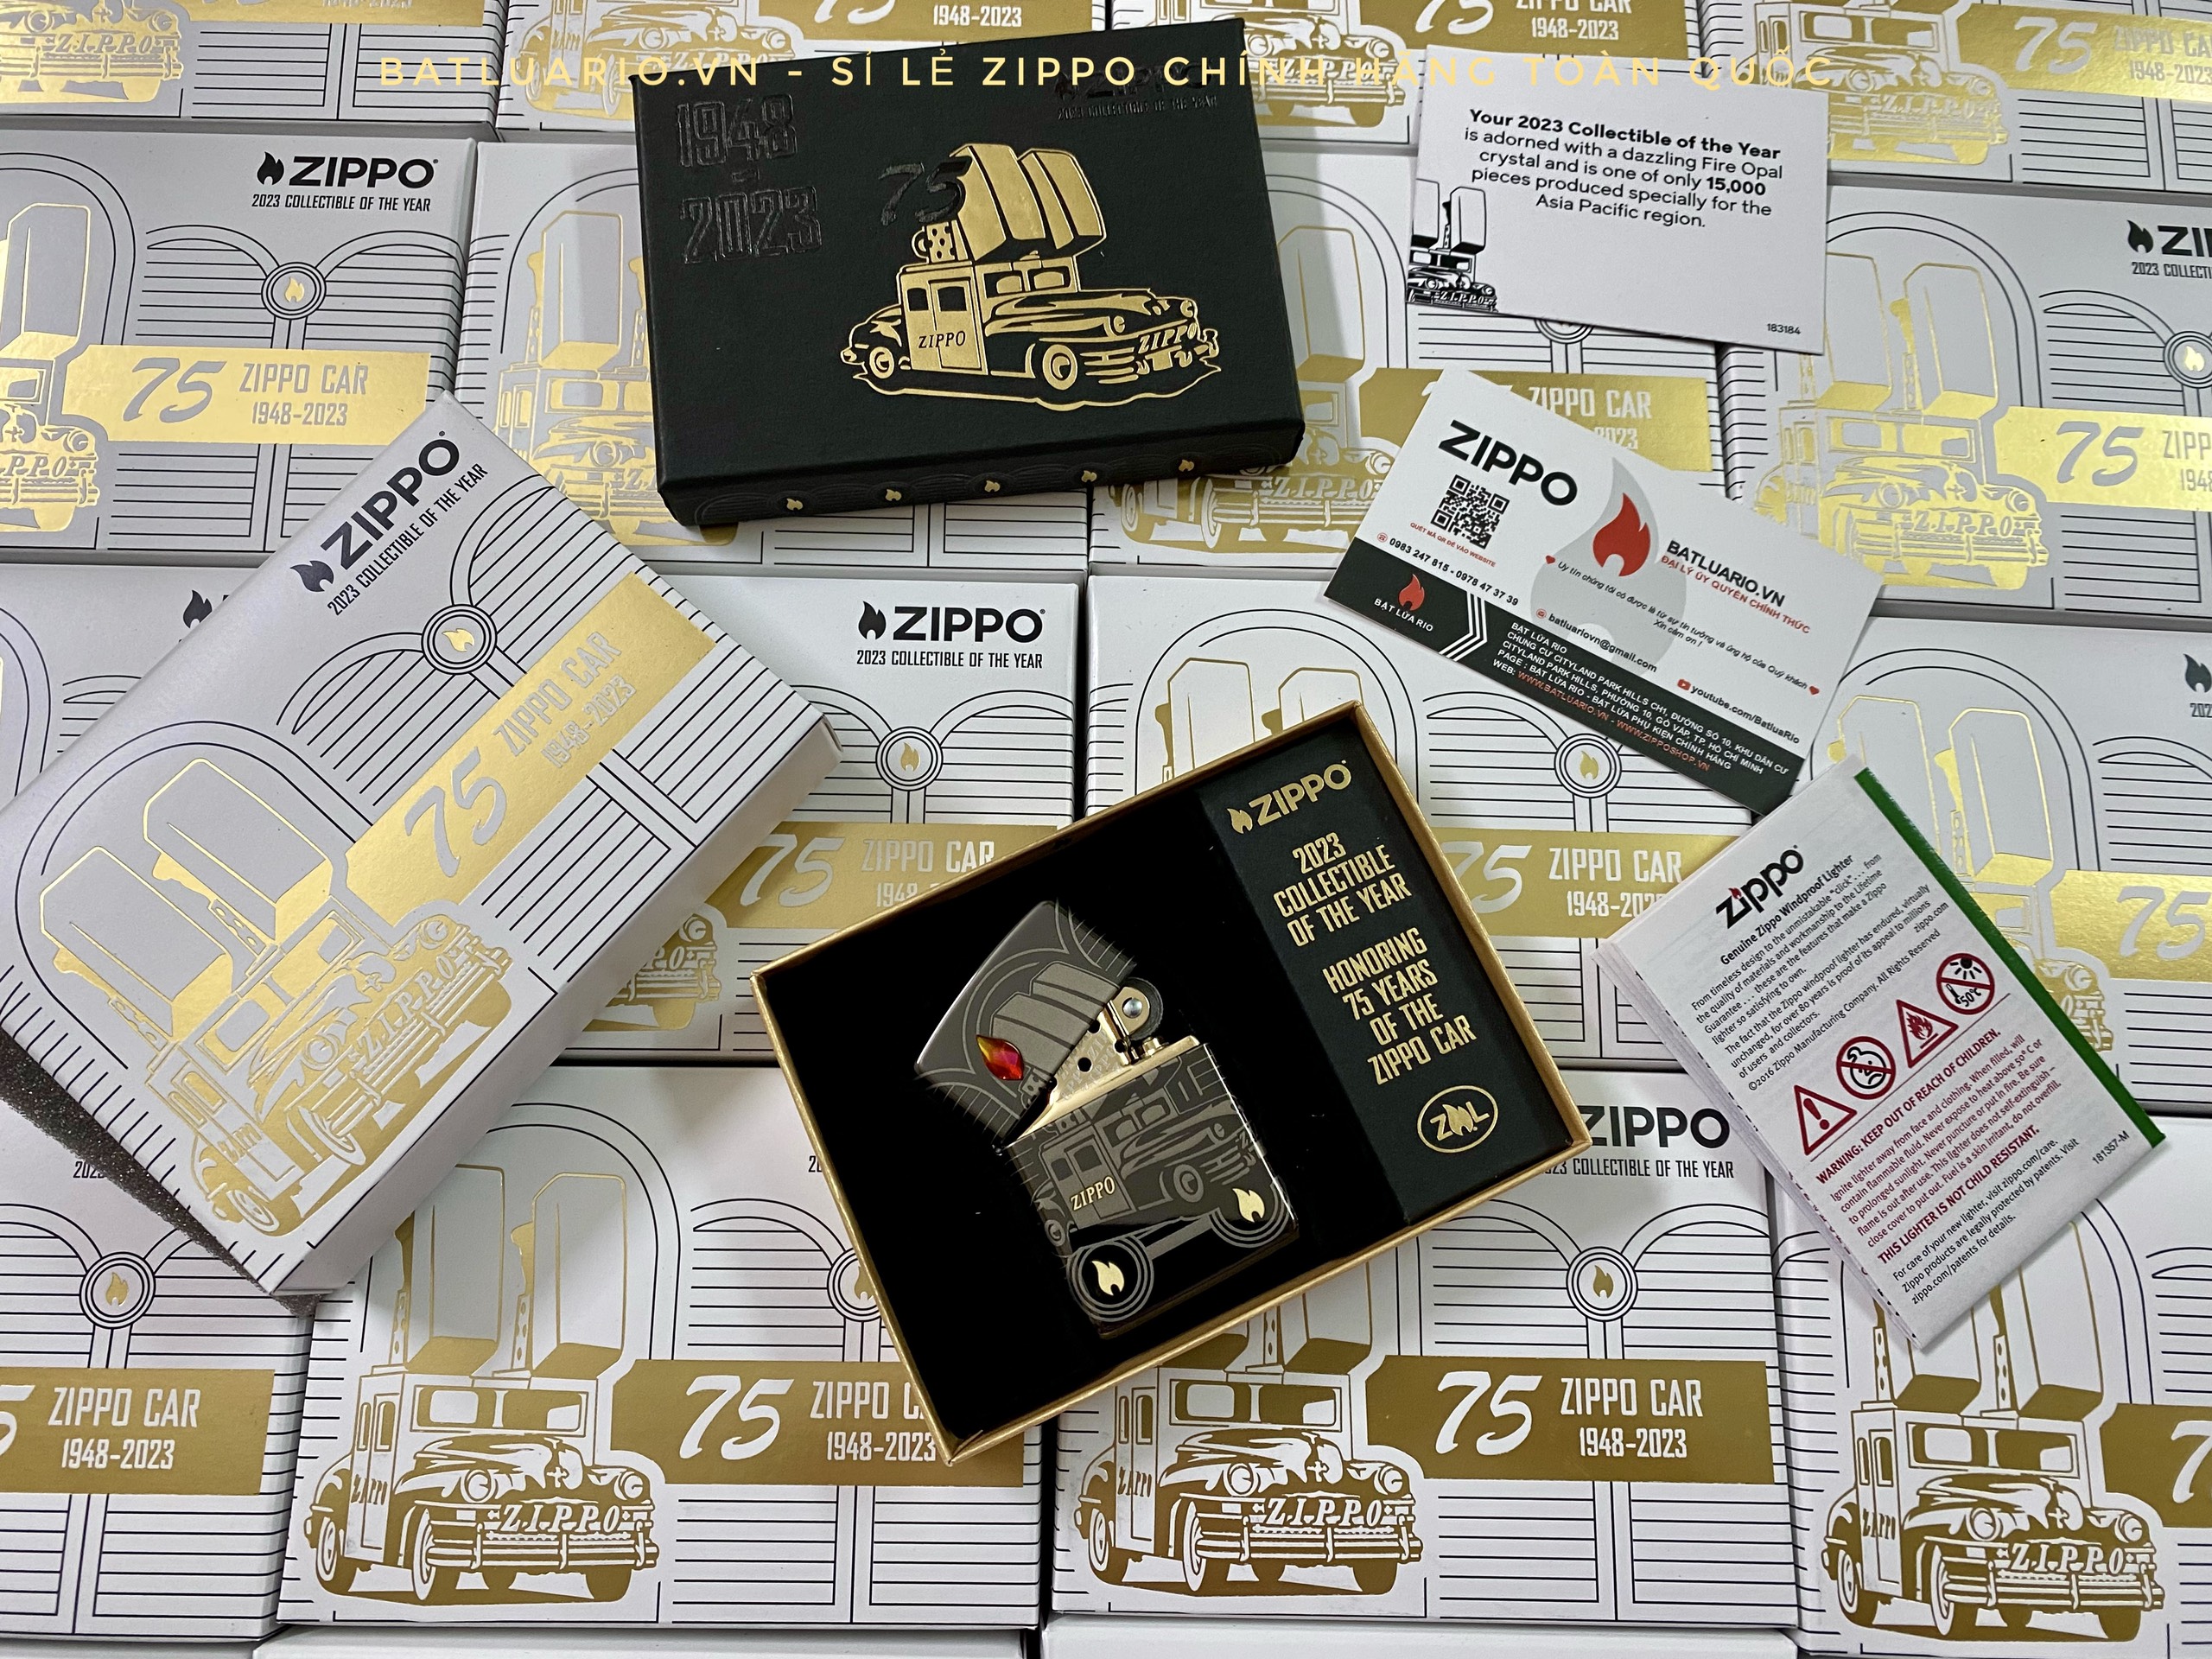 Zippo 48692 - Zippo 2023 Collectible Of The Year - Zippo Car 75th Anniversary Asia Pacific Limited Edition - Zippo COTY 2023 - Honoring 75 Years Of The Zippo Car 17